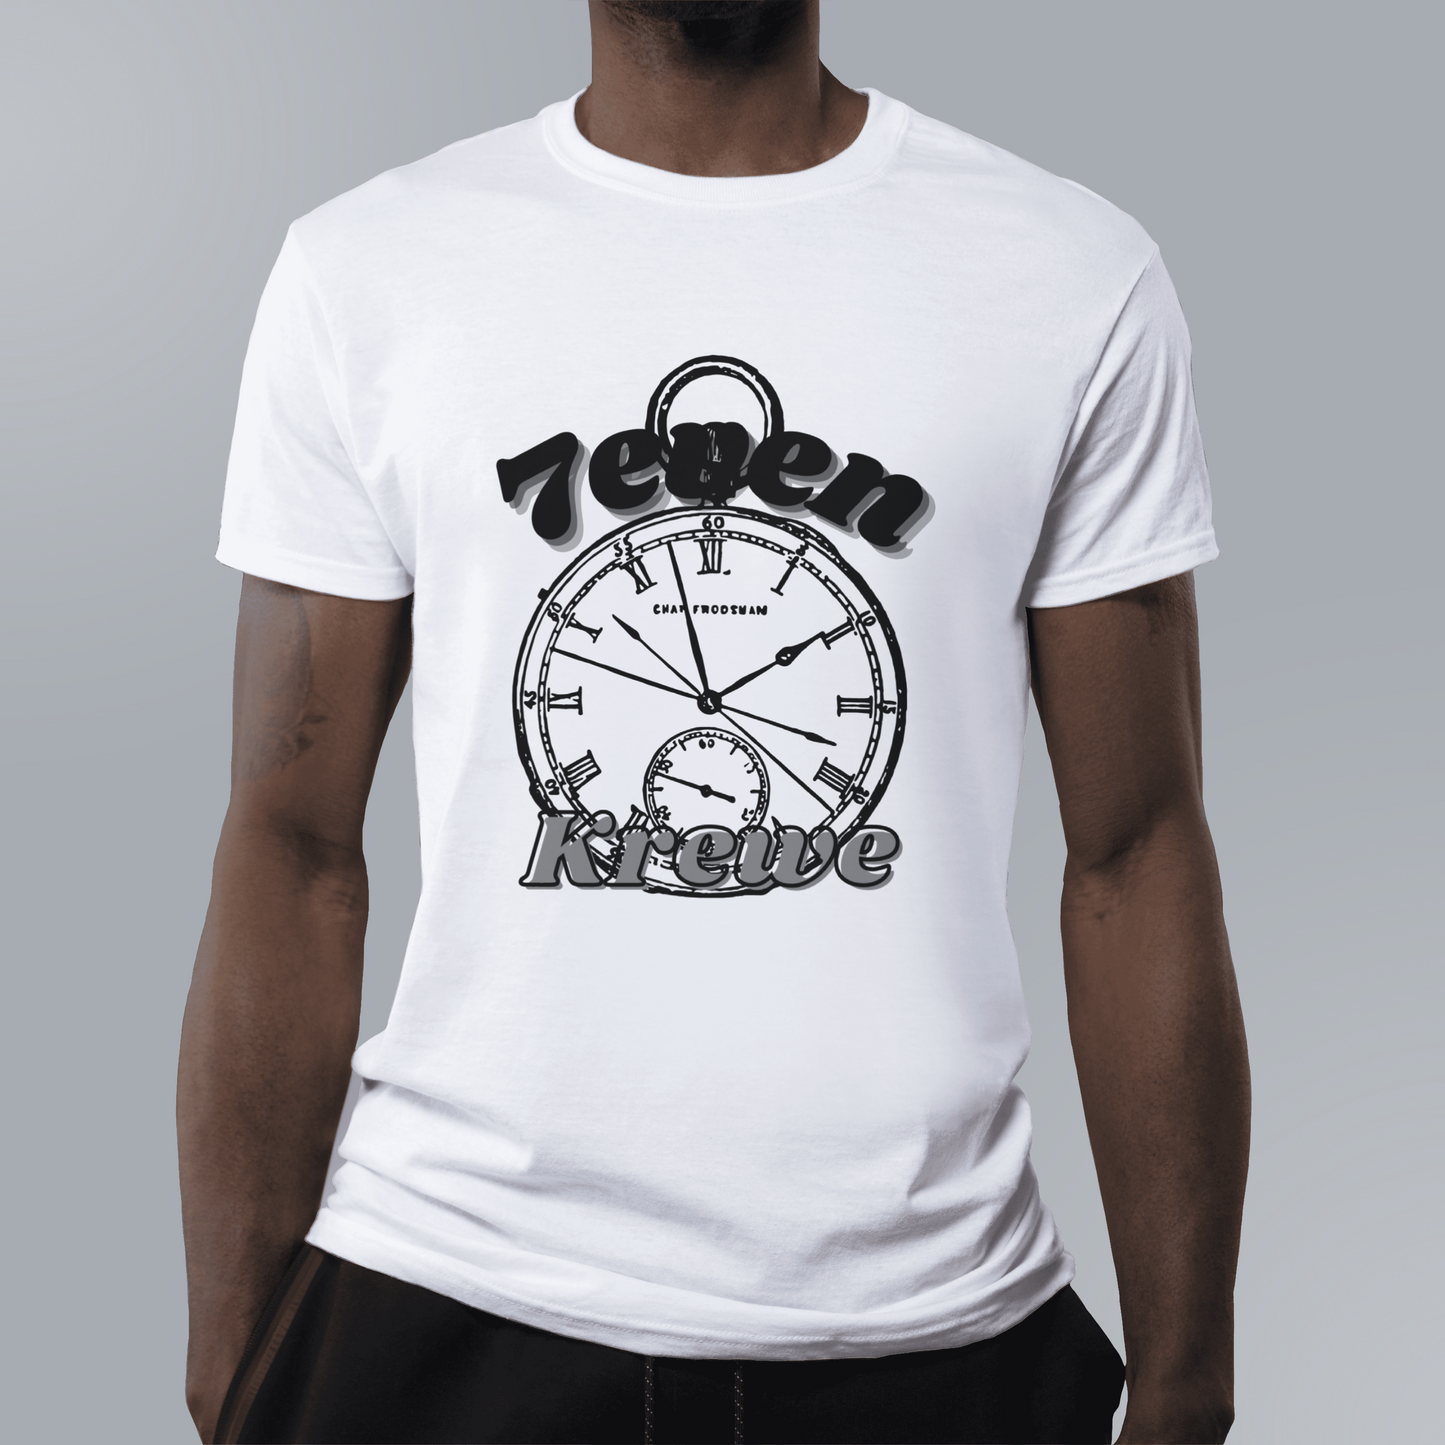 "The Time is 7even" Krewe Tee WITHOUT speckles